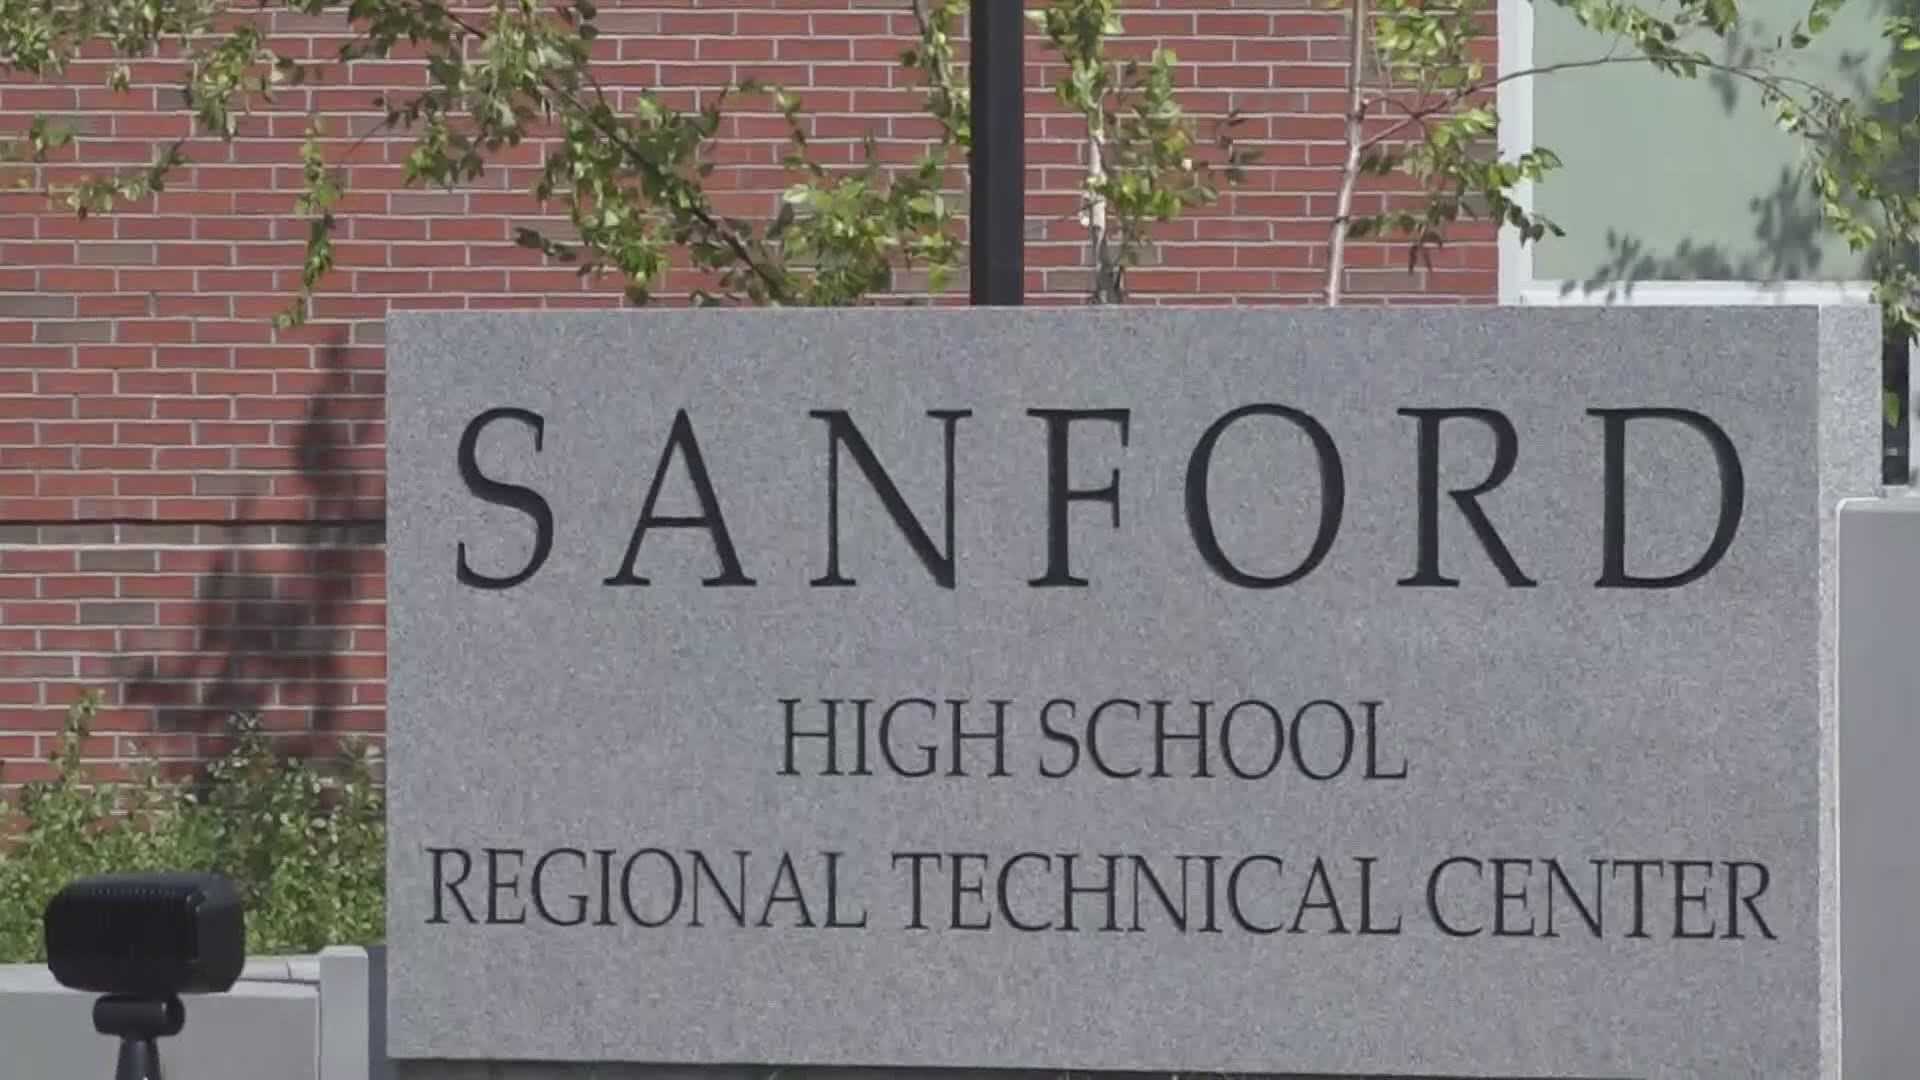 Maine CDC says Sanford High School COVID-19 outbreak is linked to gatherings outside of the school setting